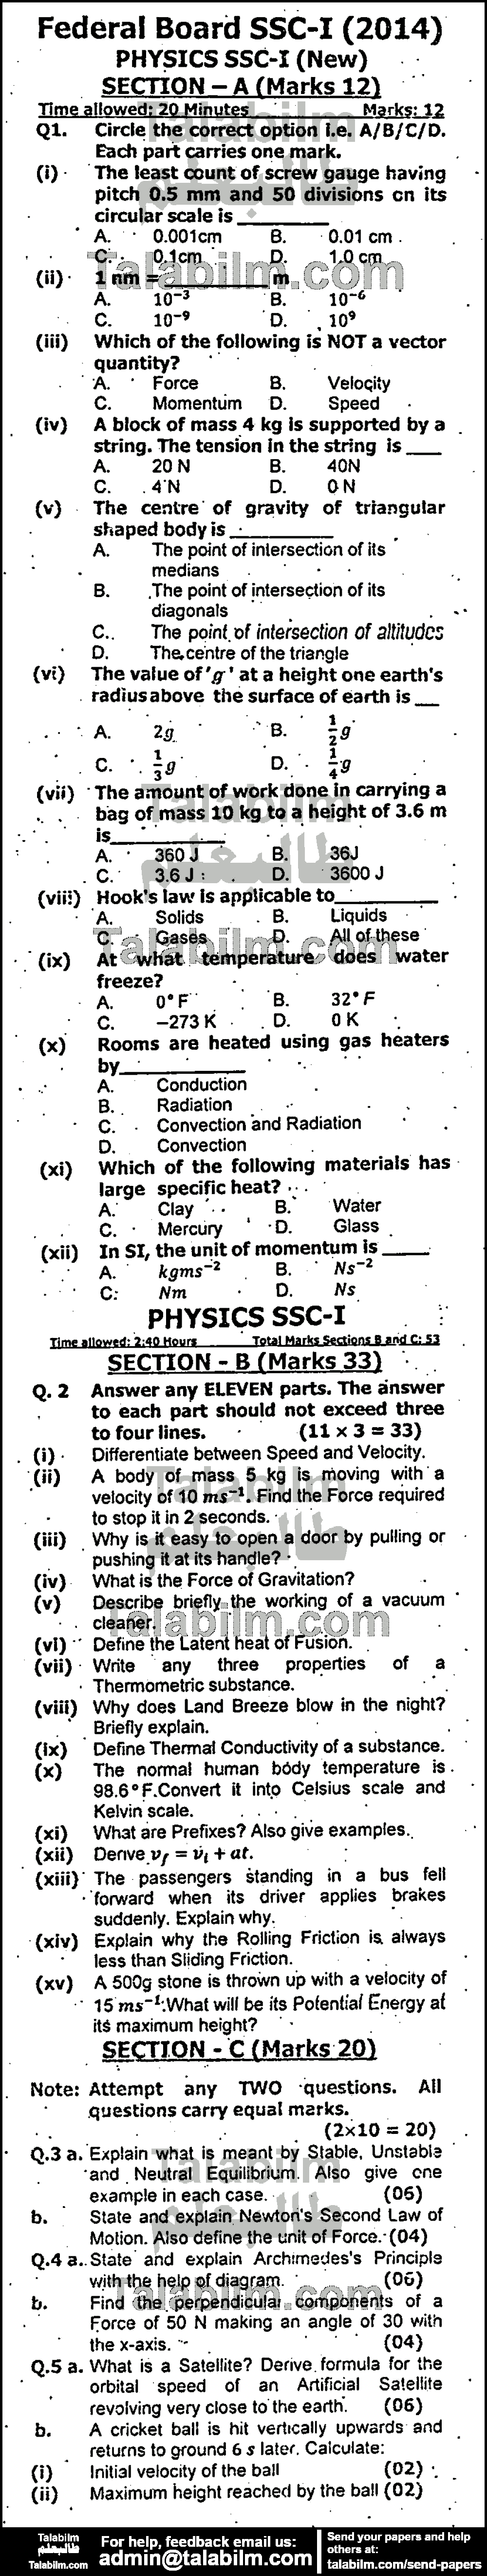 Physics 0 past paper for 2014 Group-I